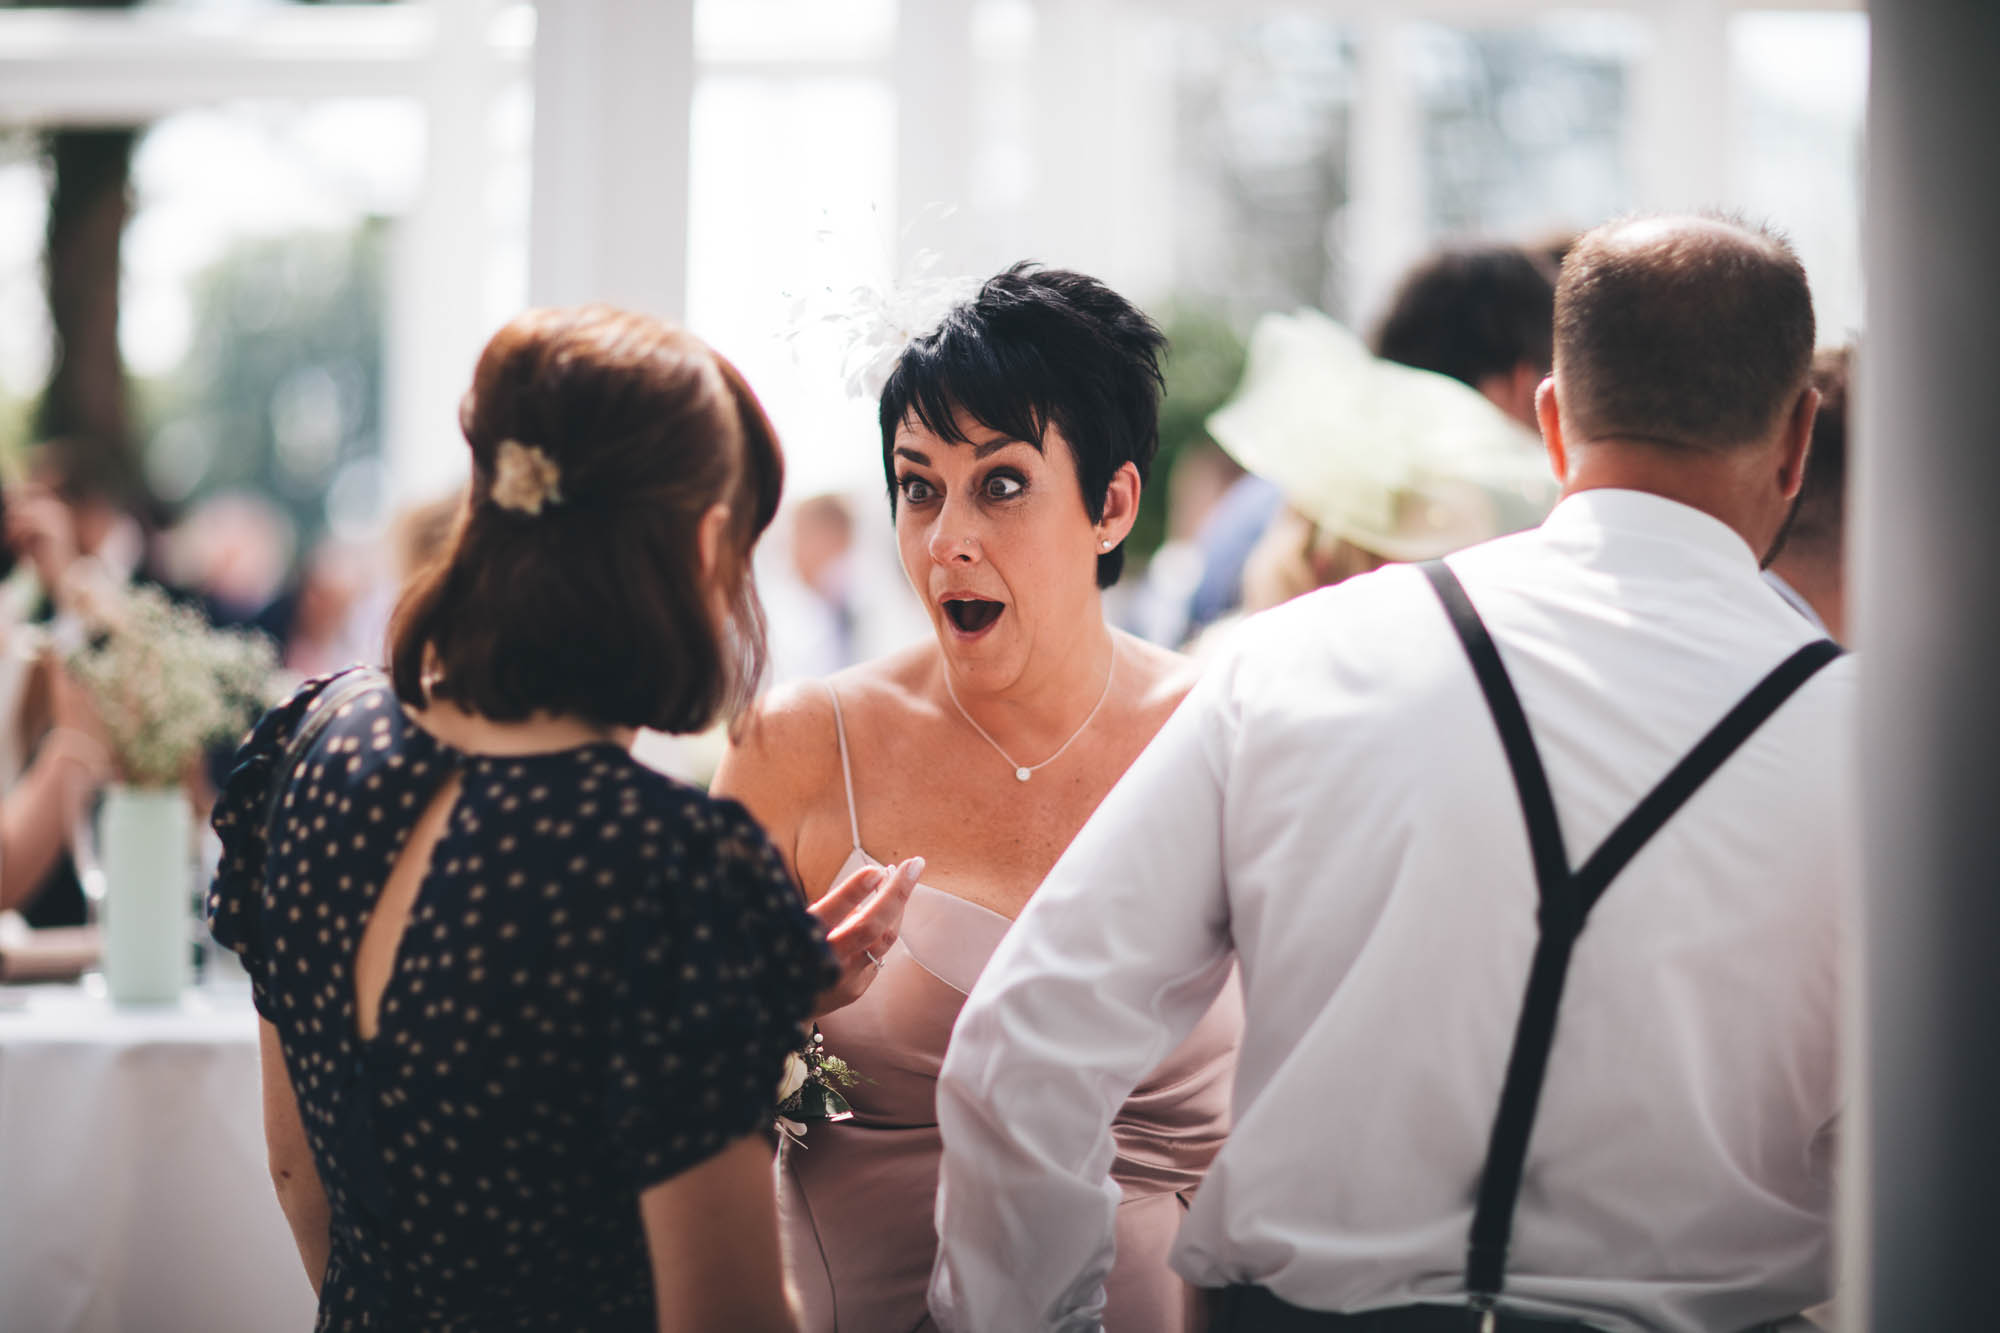 Wedding guest looks shocked and overjoyed after being told something fantastic